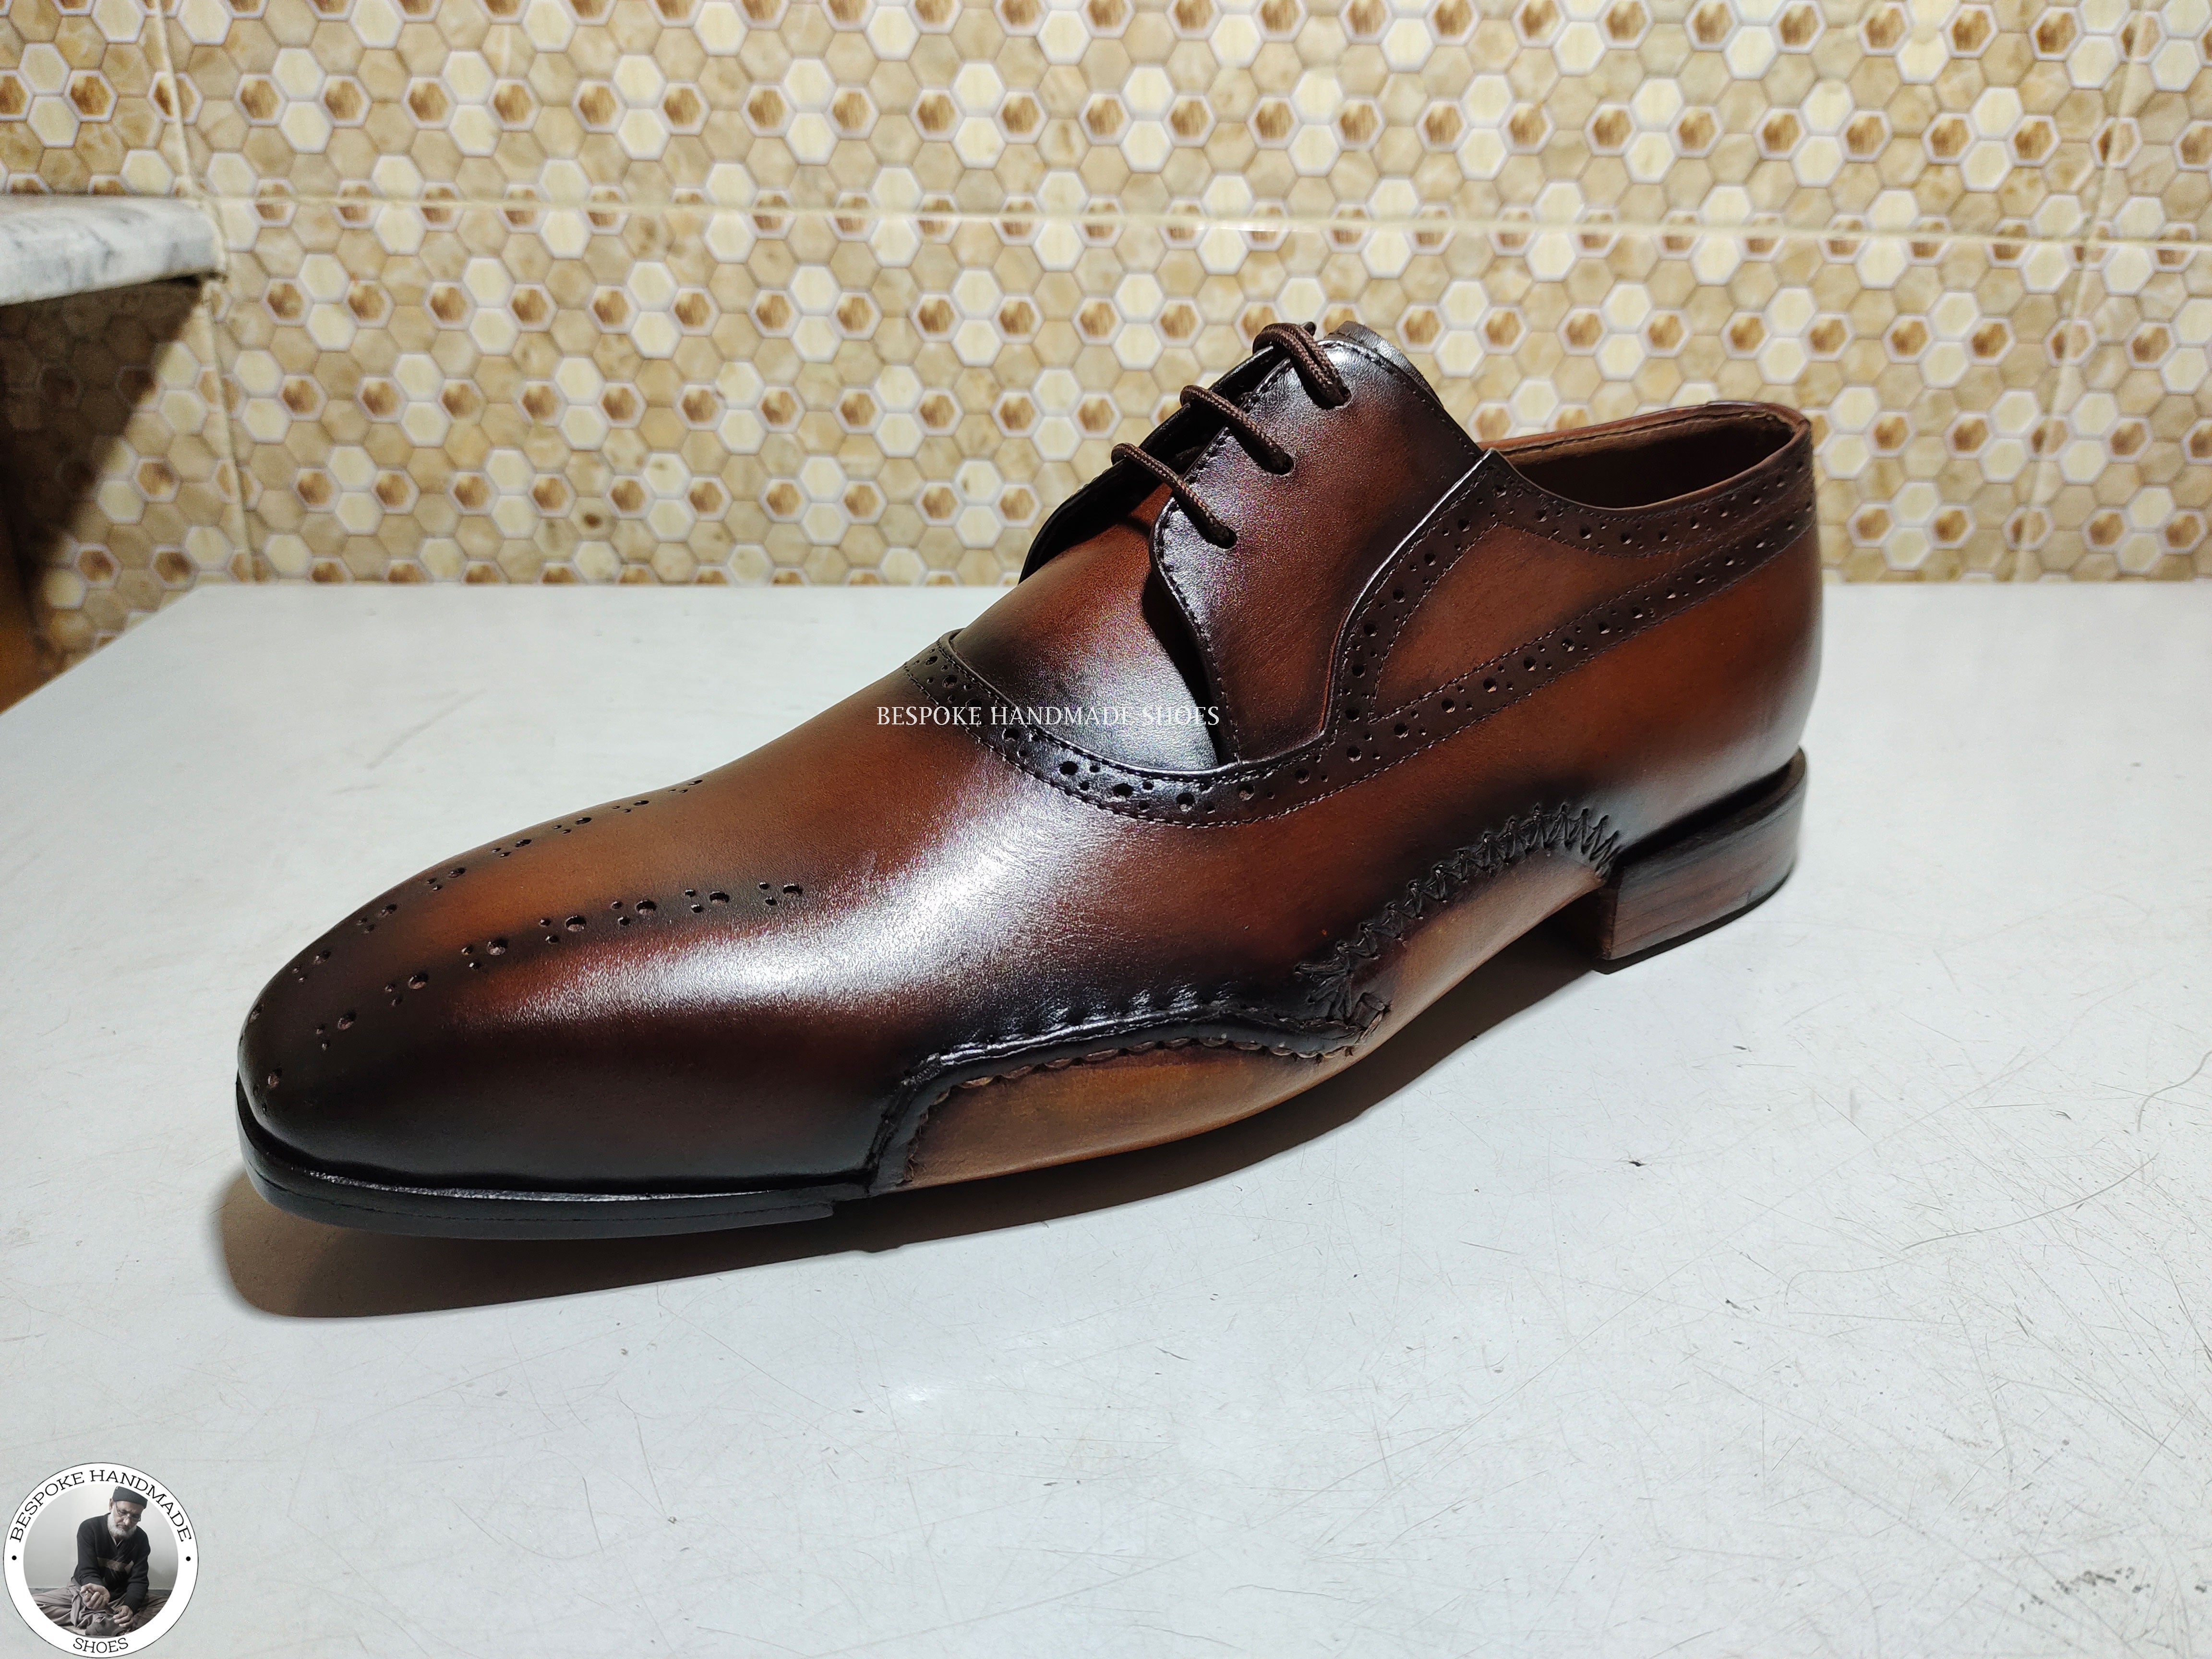 Bespoke Dress Genuine Brown Color Hand Painted Leather Shoe, Whole Cut Oxford Wingtip Lace up Shoes For Men's